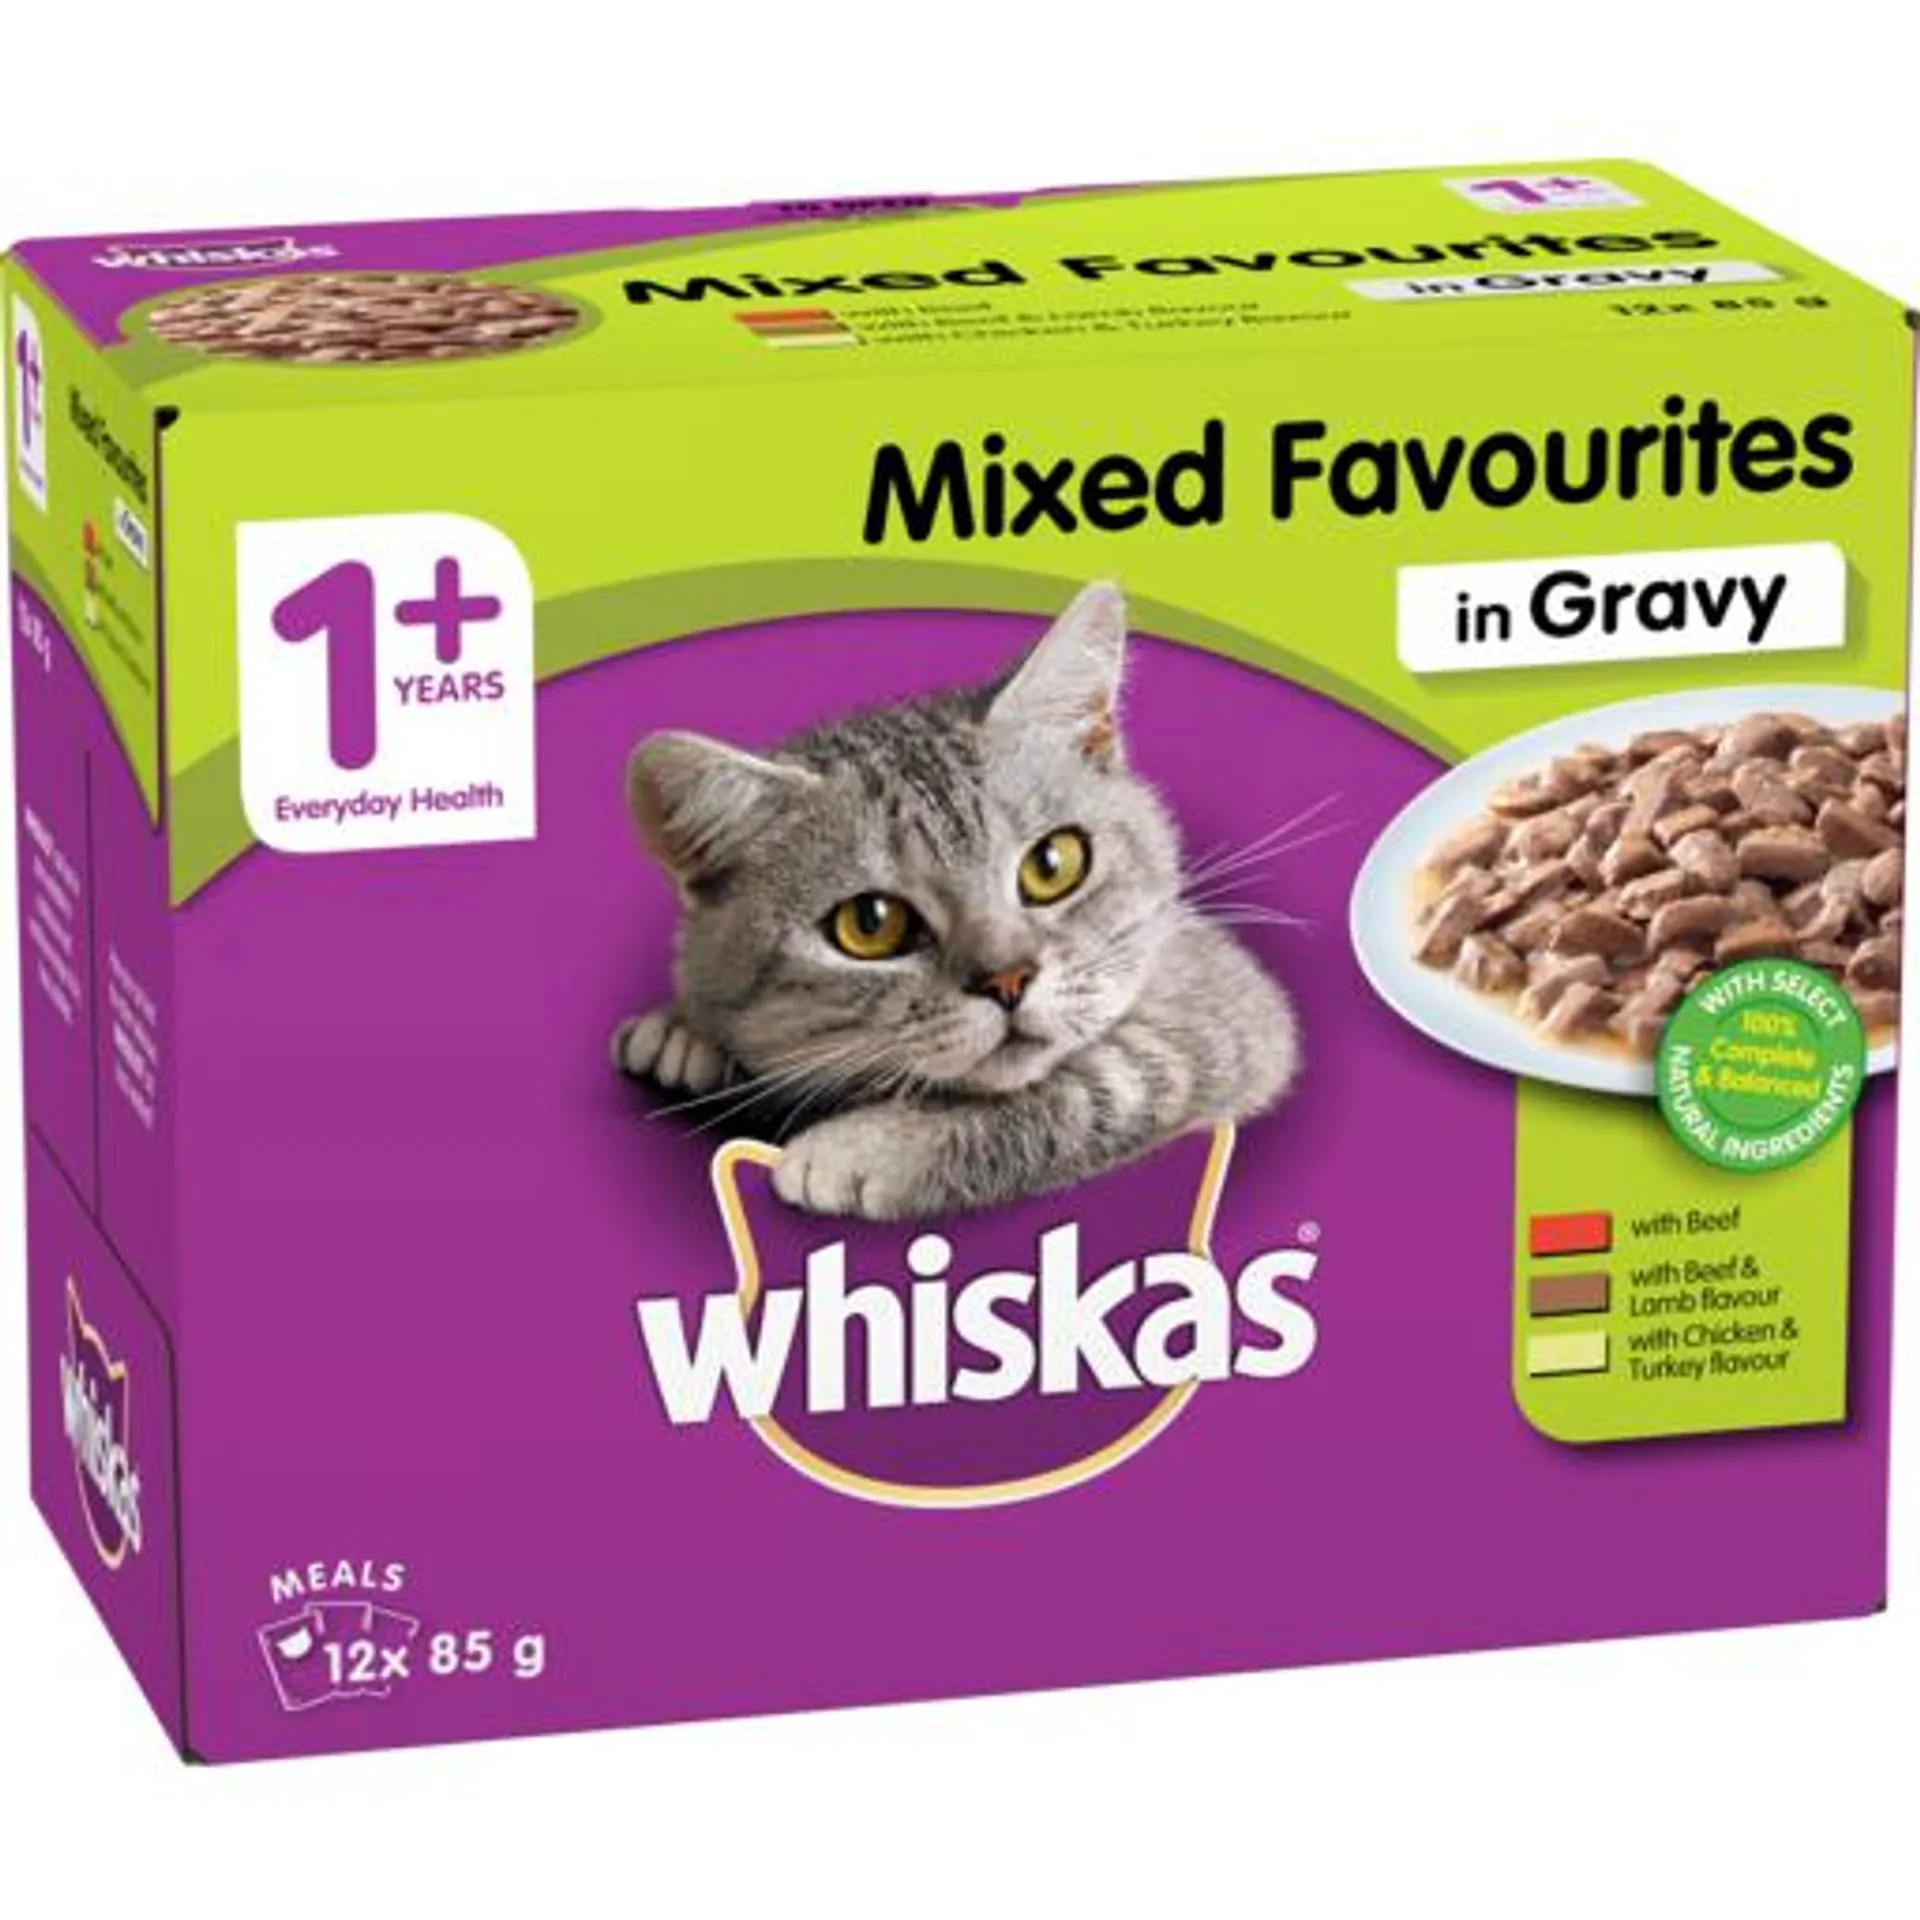 Whiskas Cat Food Pouch Mixed Favourites 12 Pack